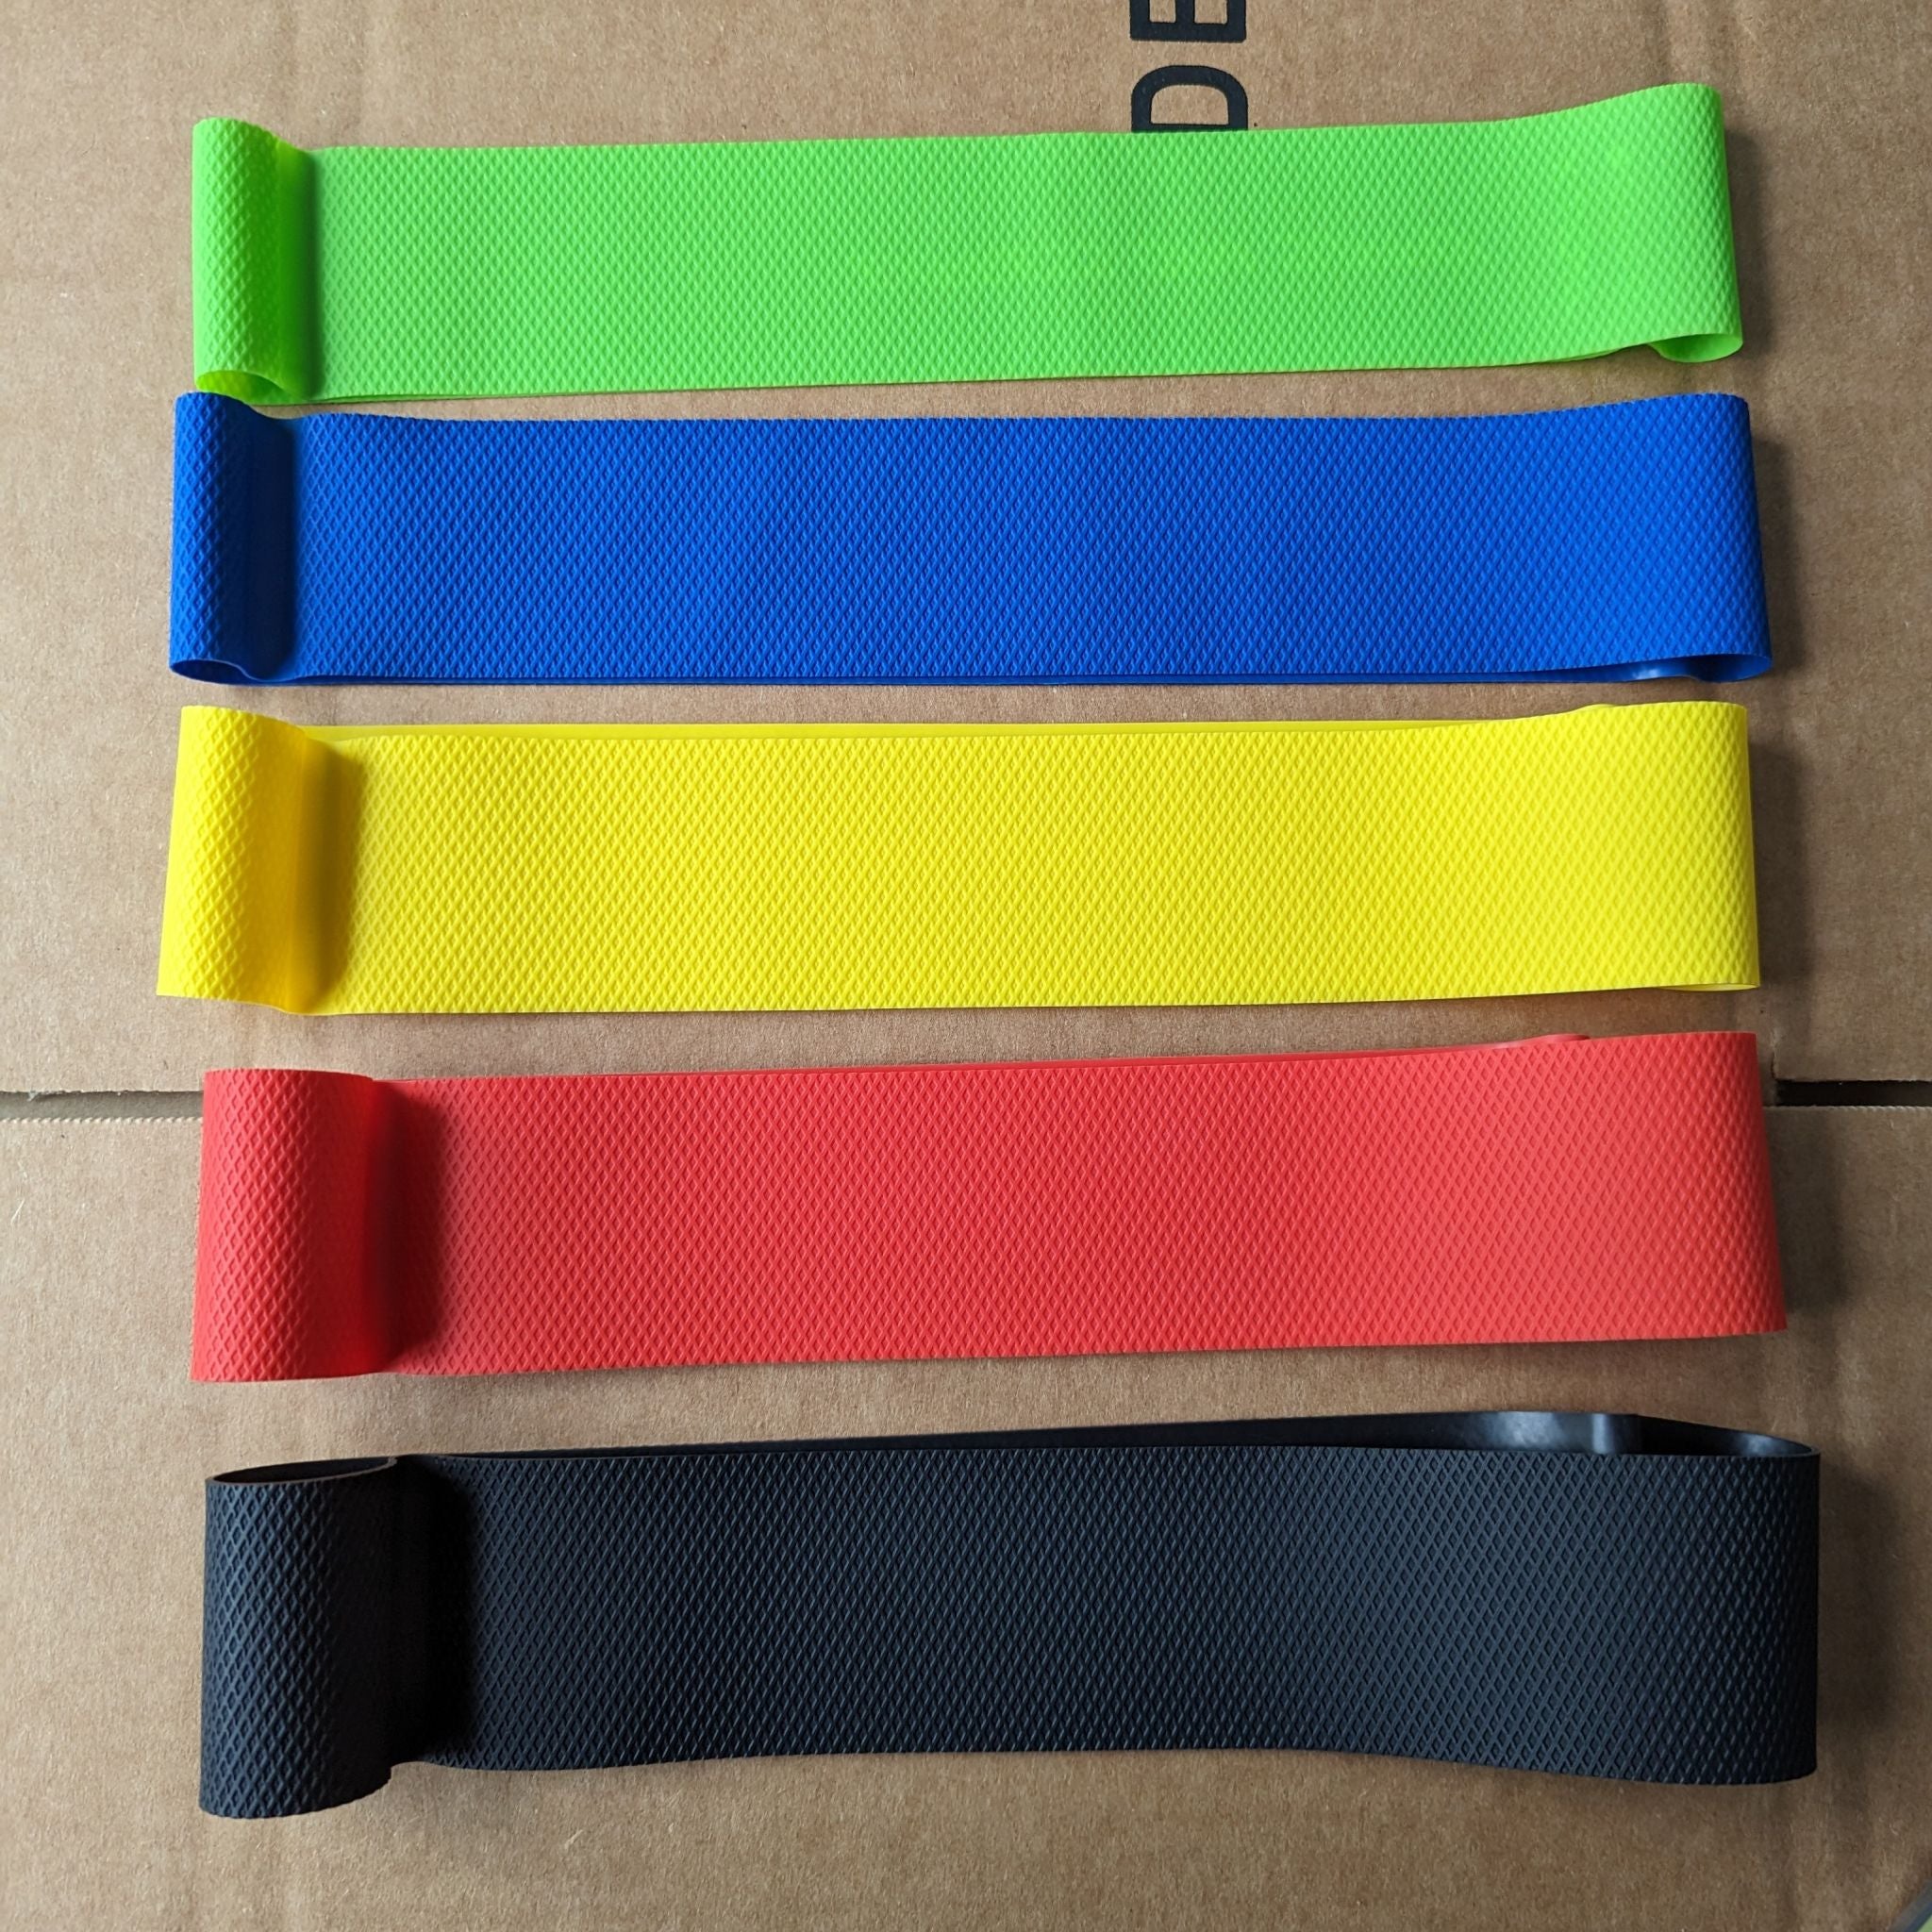 Back view of the Express Gym Supply 3D Grip Latex Resistance Band Set